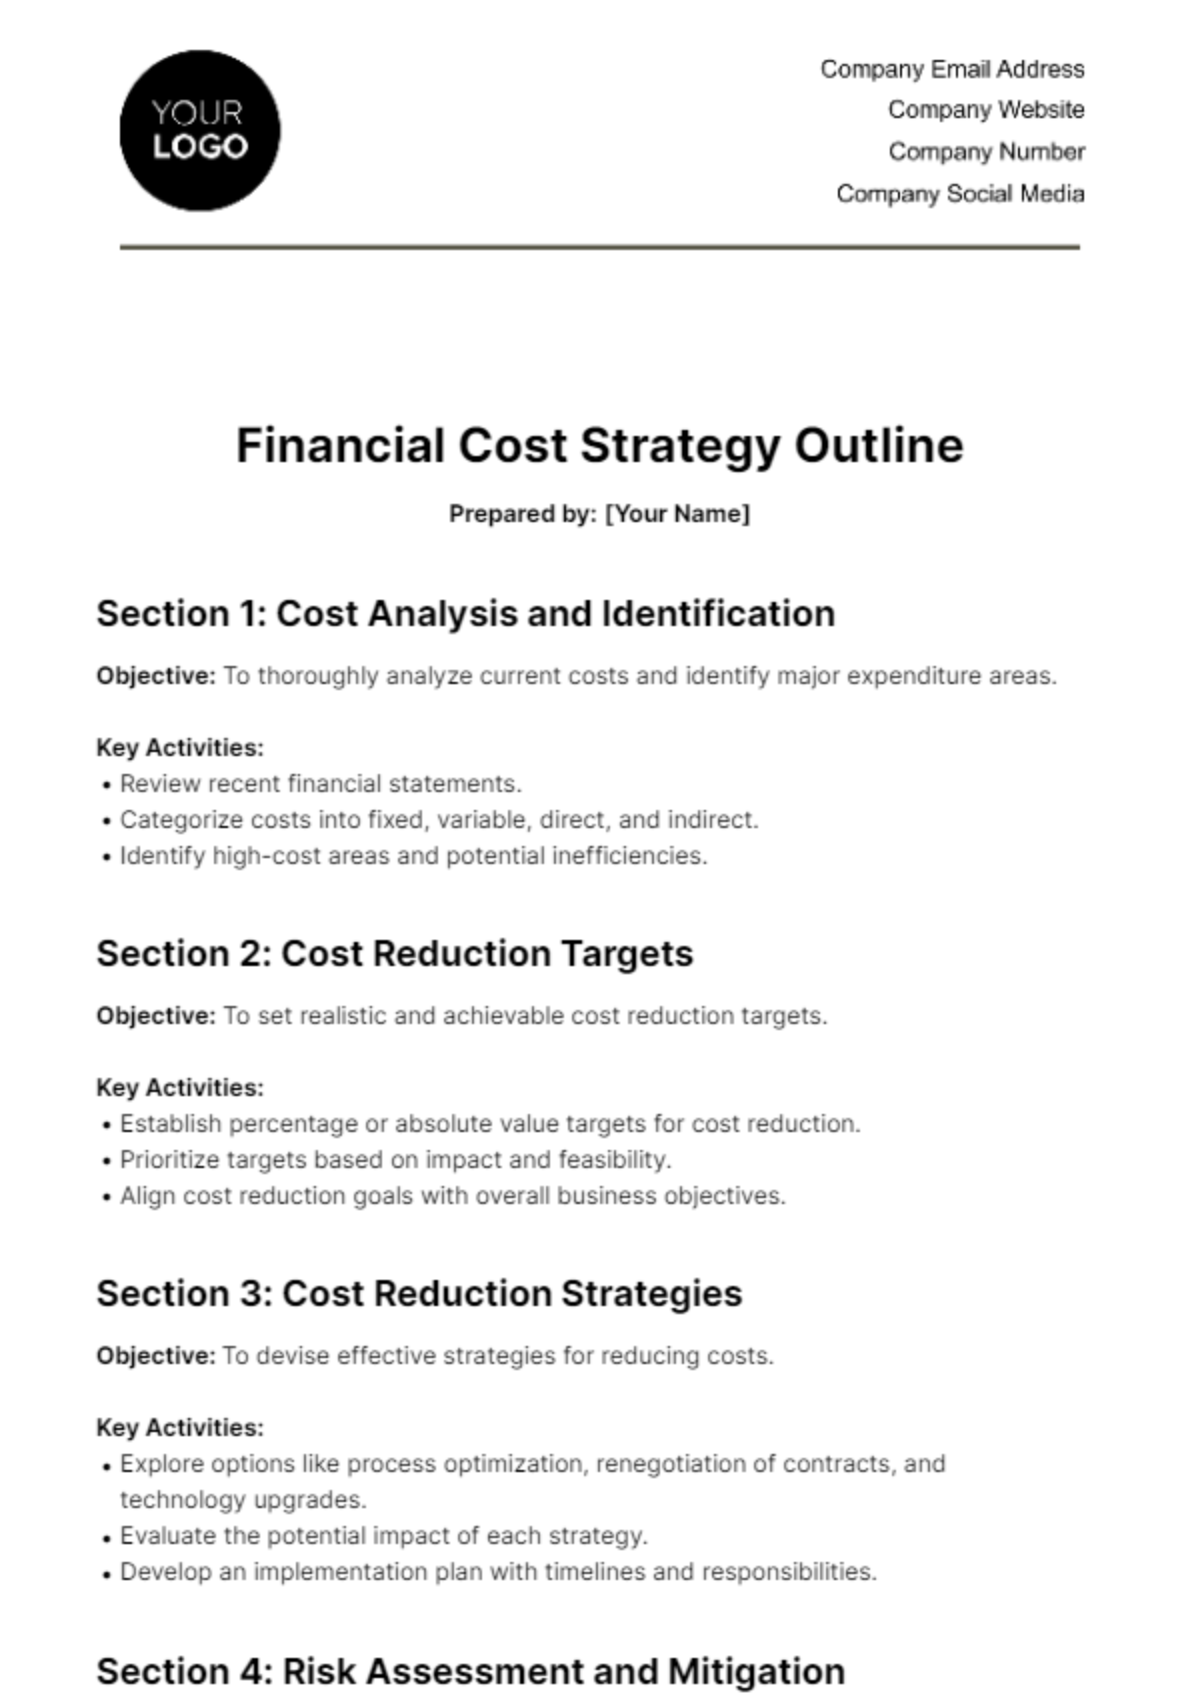 Free Financial Cost Strategy Outline Template